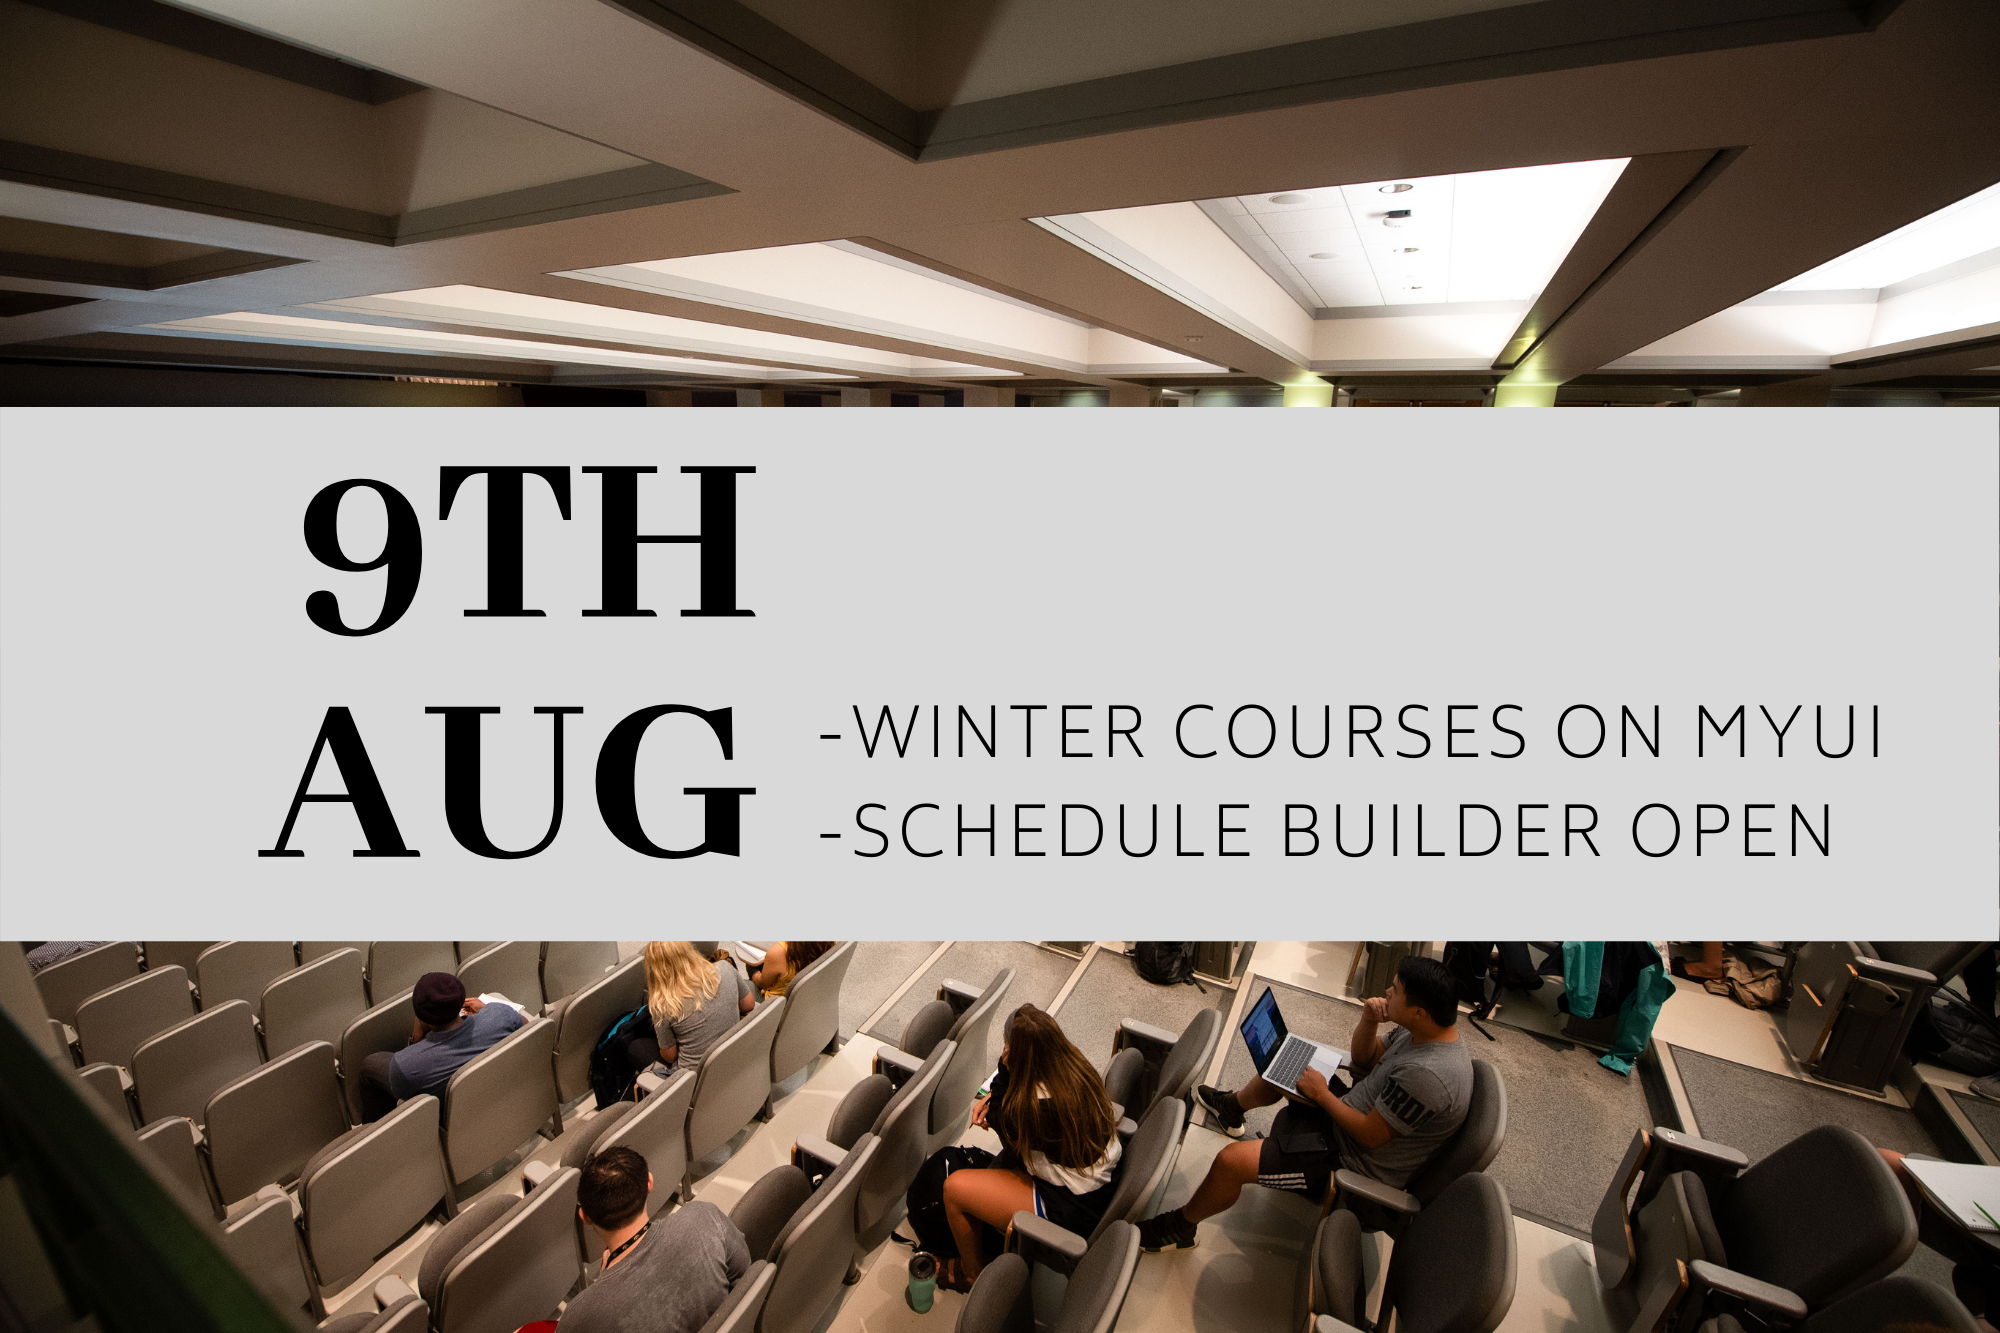 Winter courses on MyUI